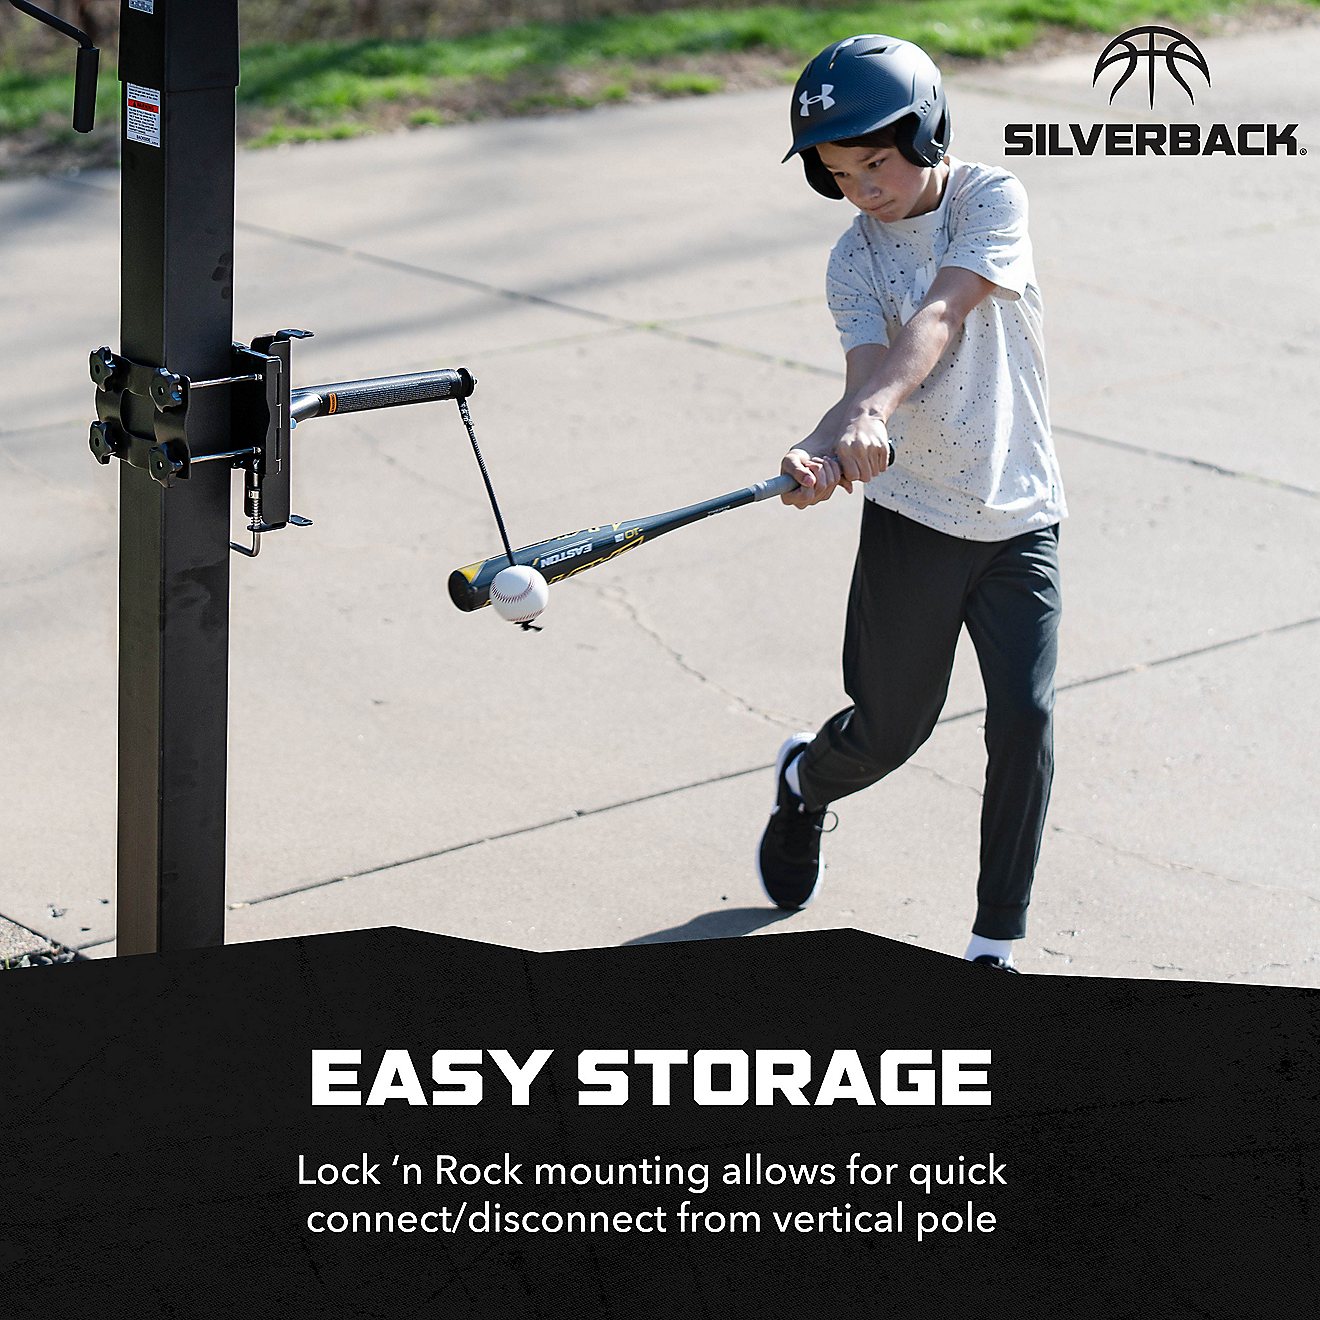 Escalade Sports Silverback Portable Baseball Swing Trainer                                                                       - view number 6